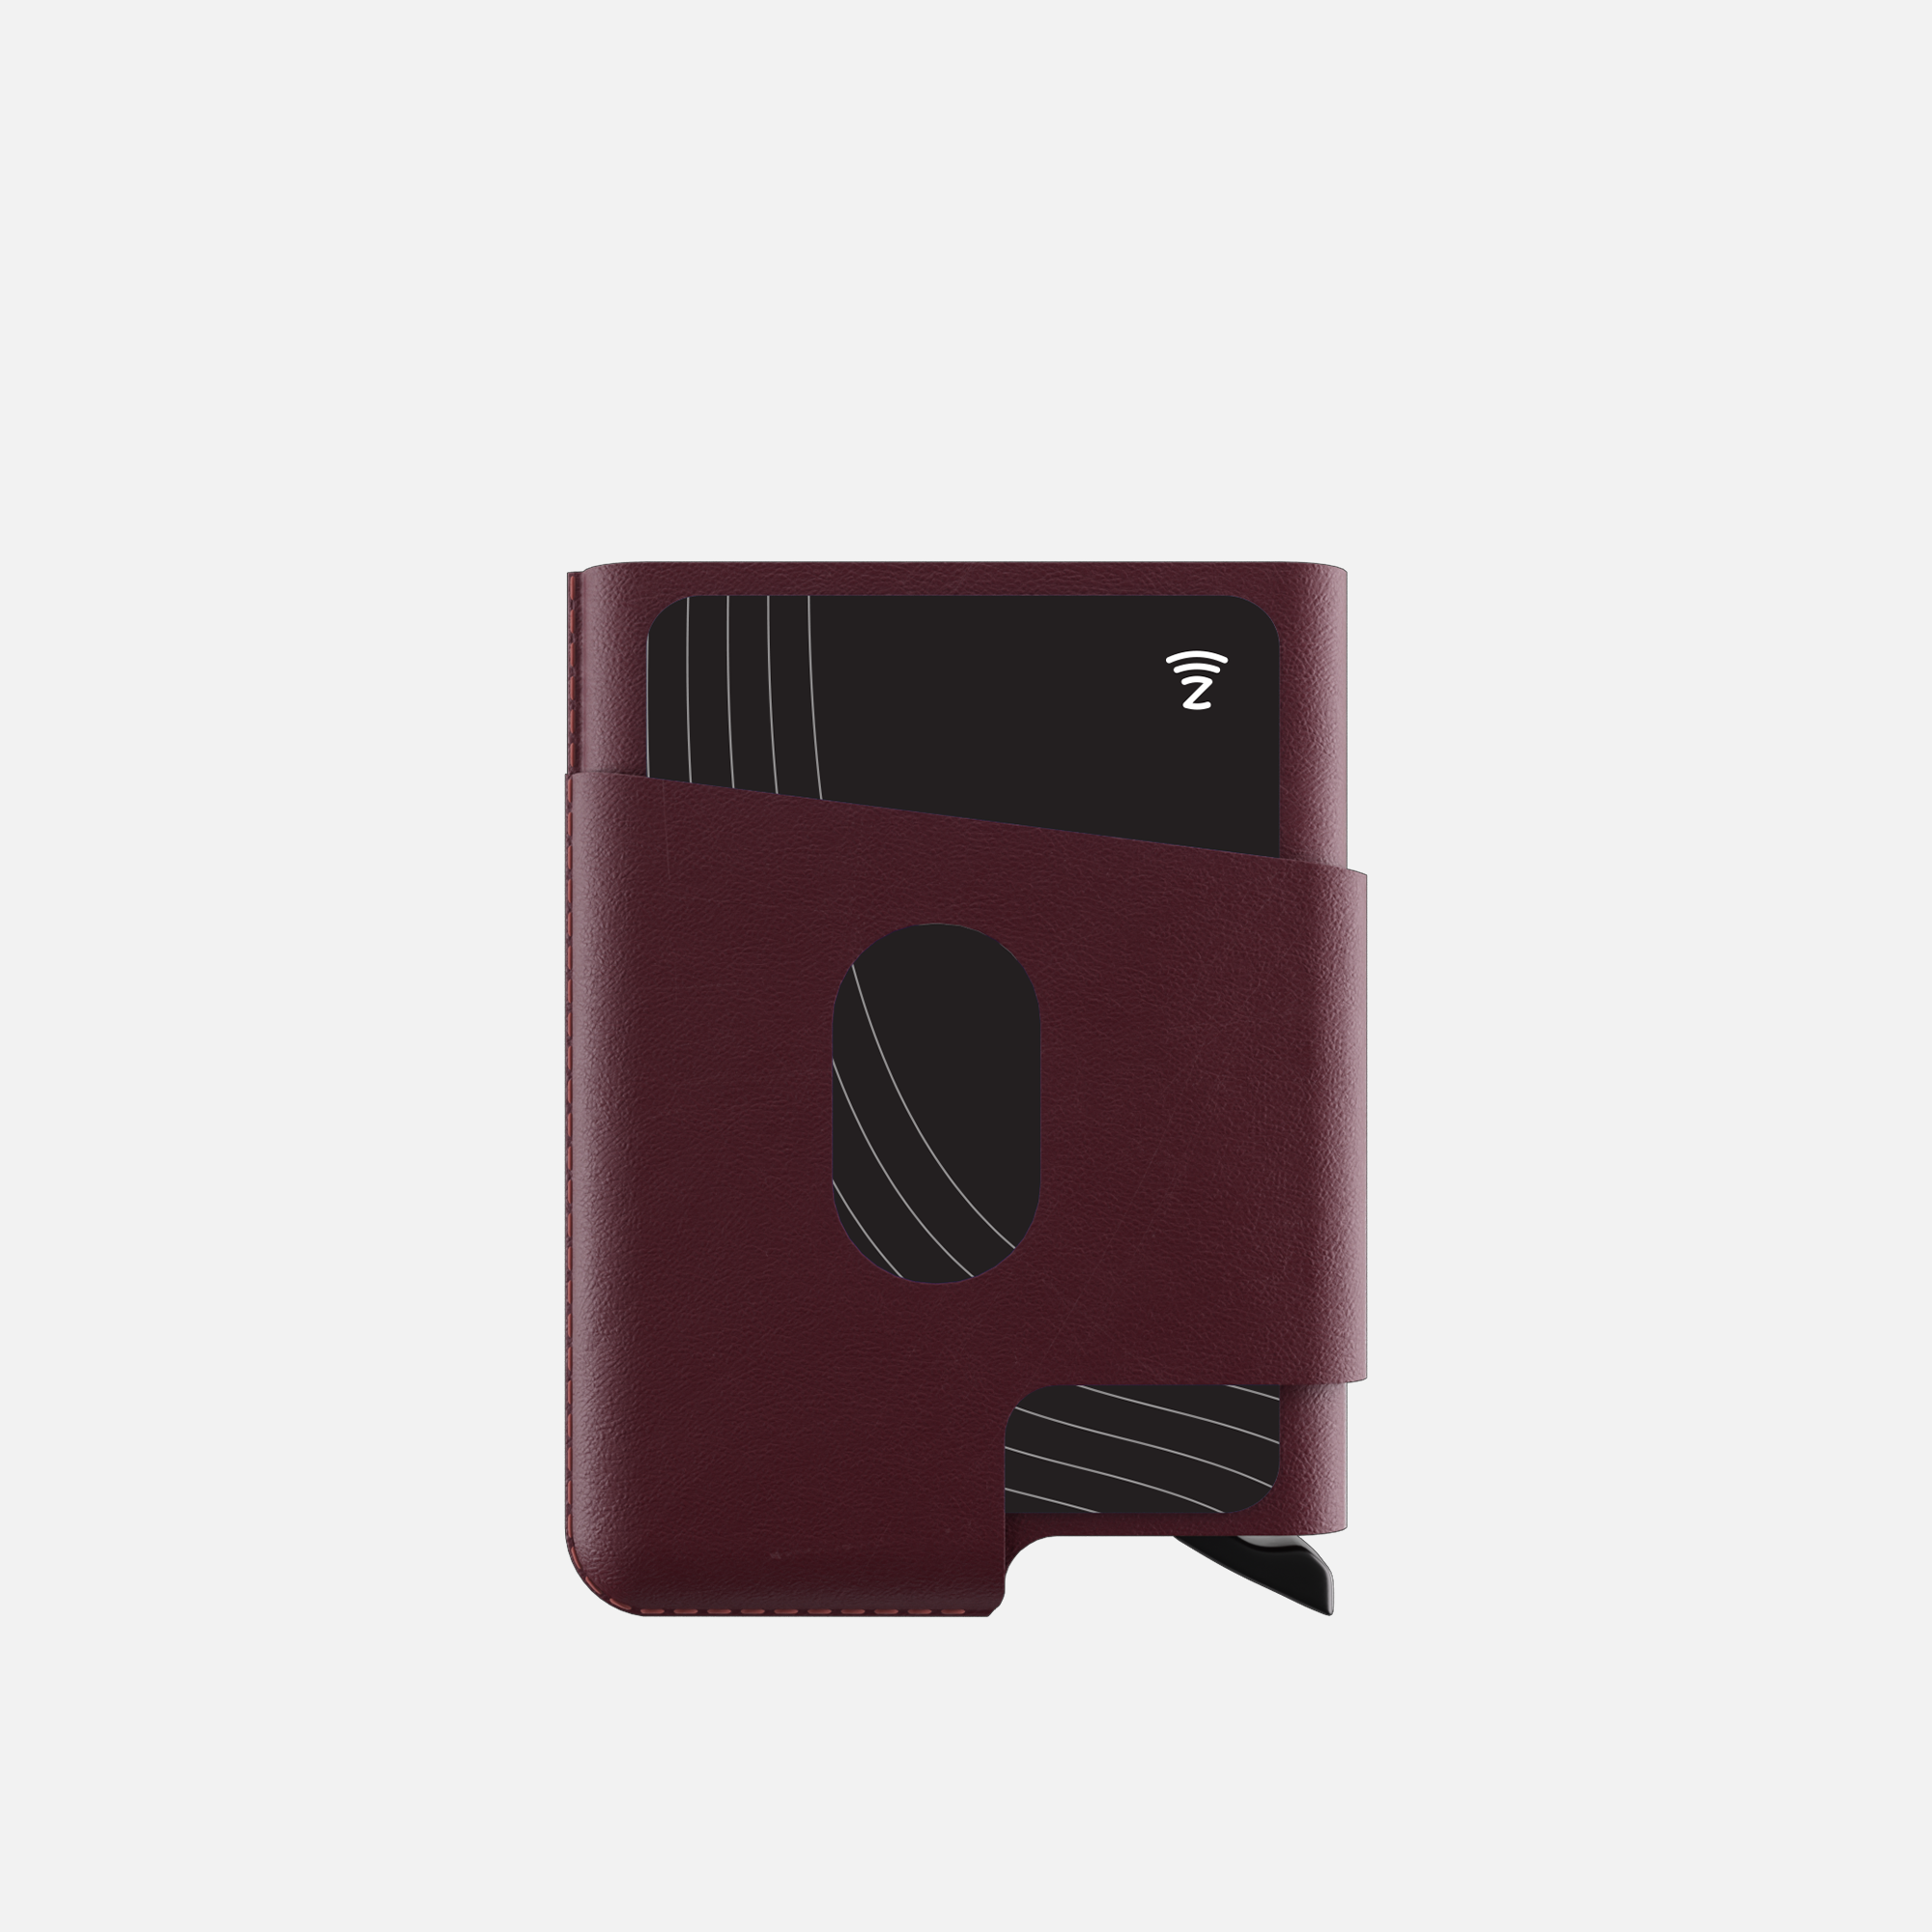 Burgundy leather cardholder wallet with black credit card visible, isolated on white background.